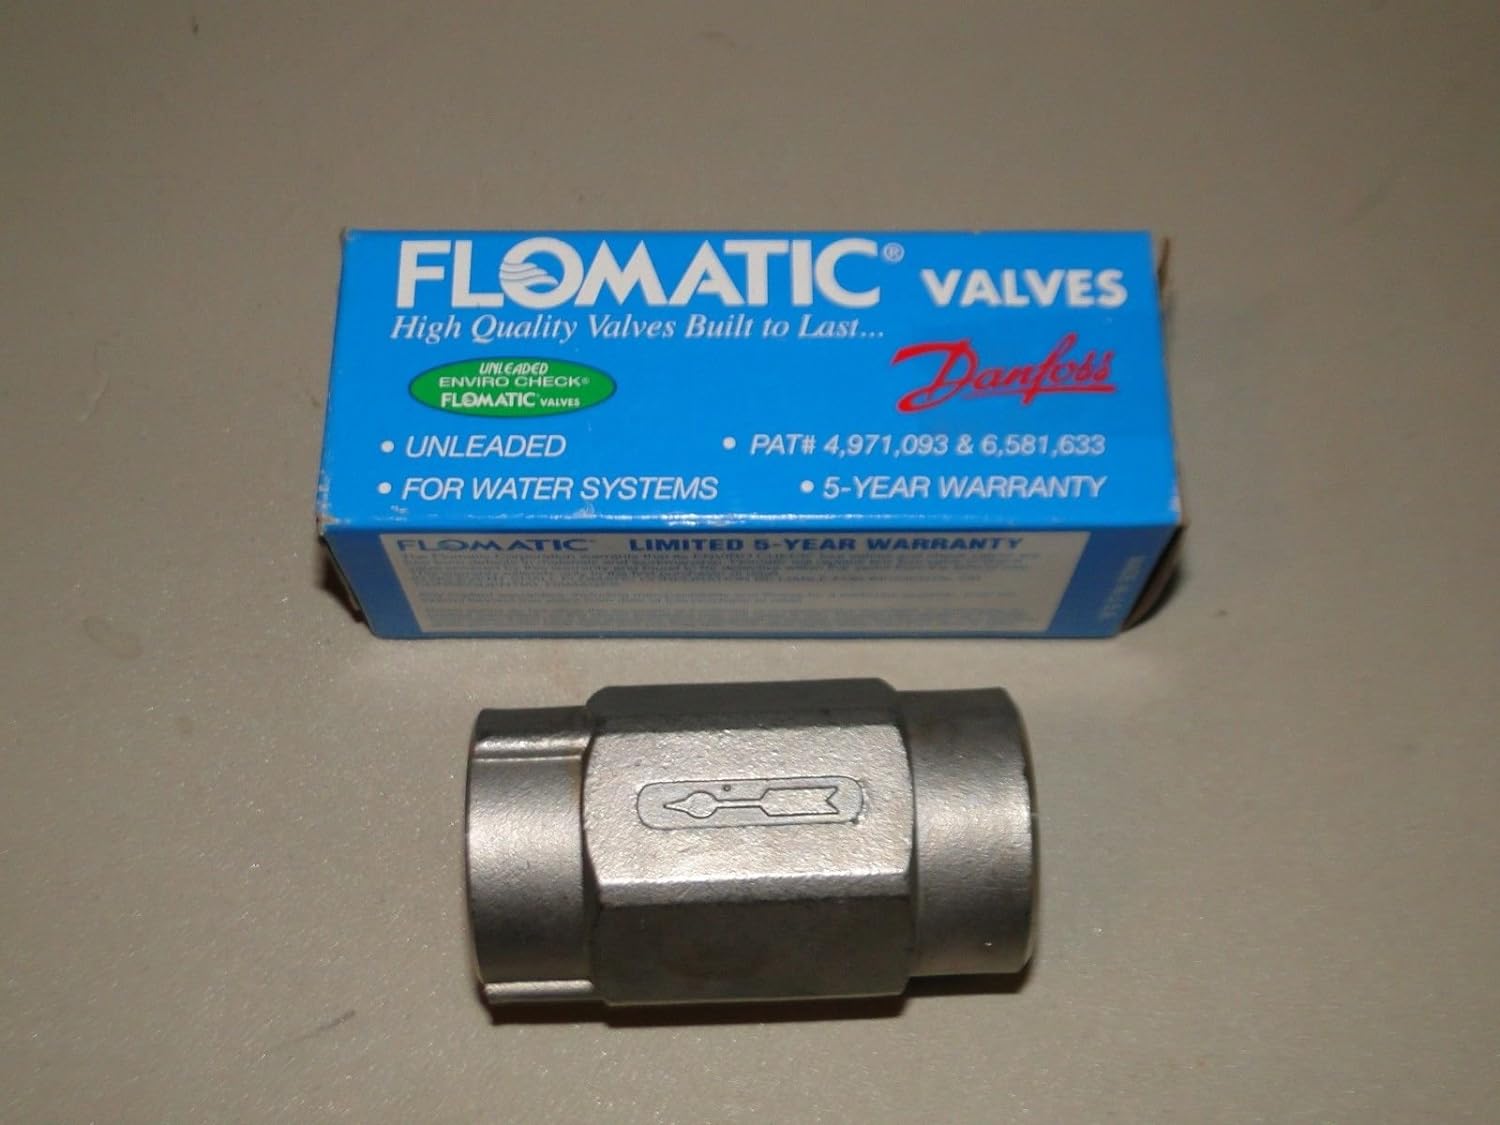 STAINLESS STEEL 1 1/4(1.25) CHECK VALVE for WATER WELL PUMP Pressure TANK FLOMATIC 4202SS2